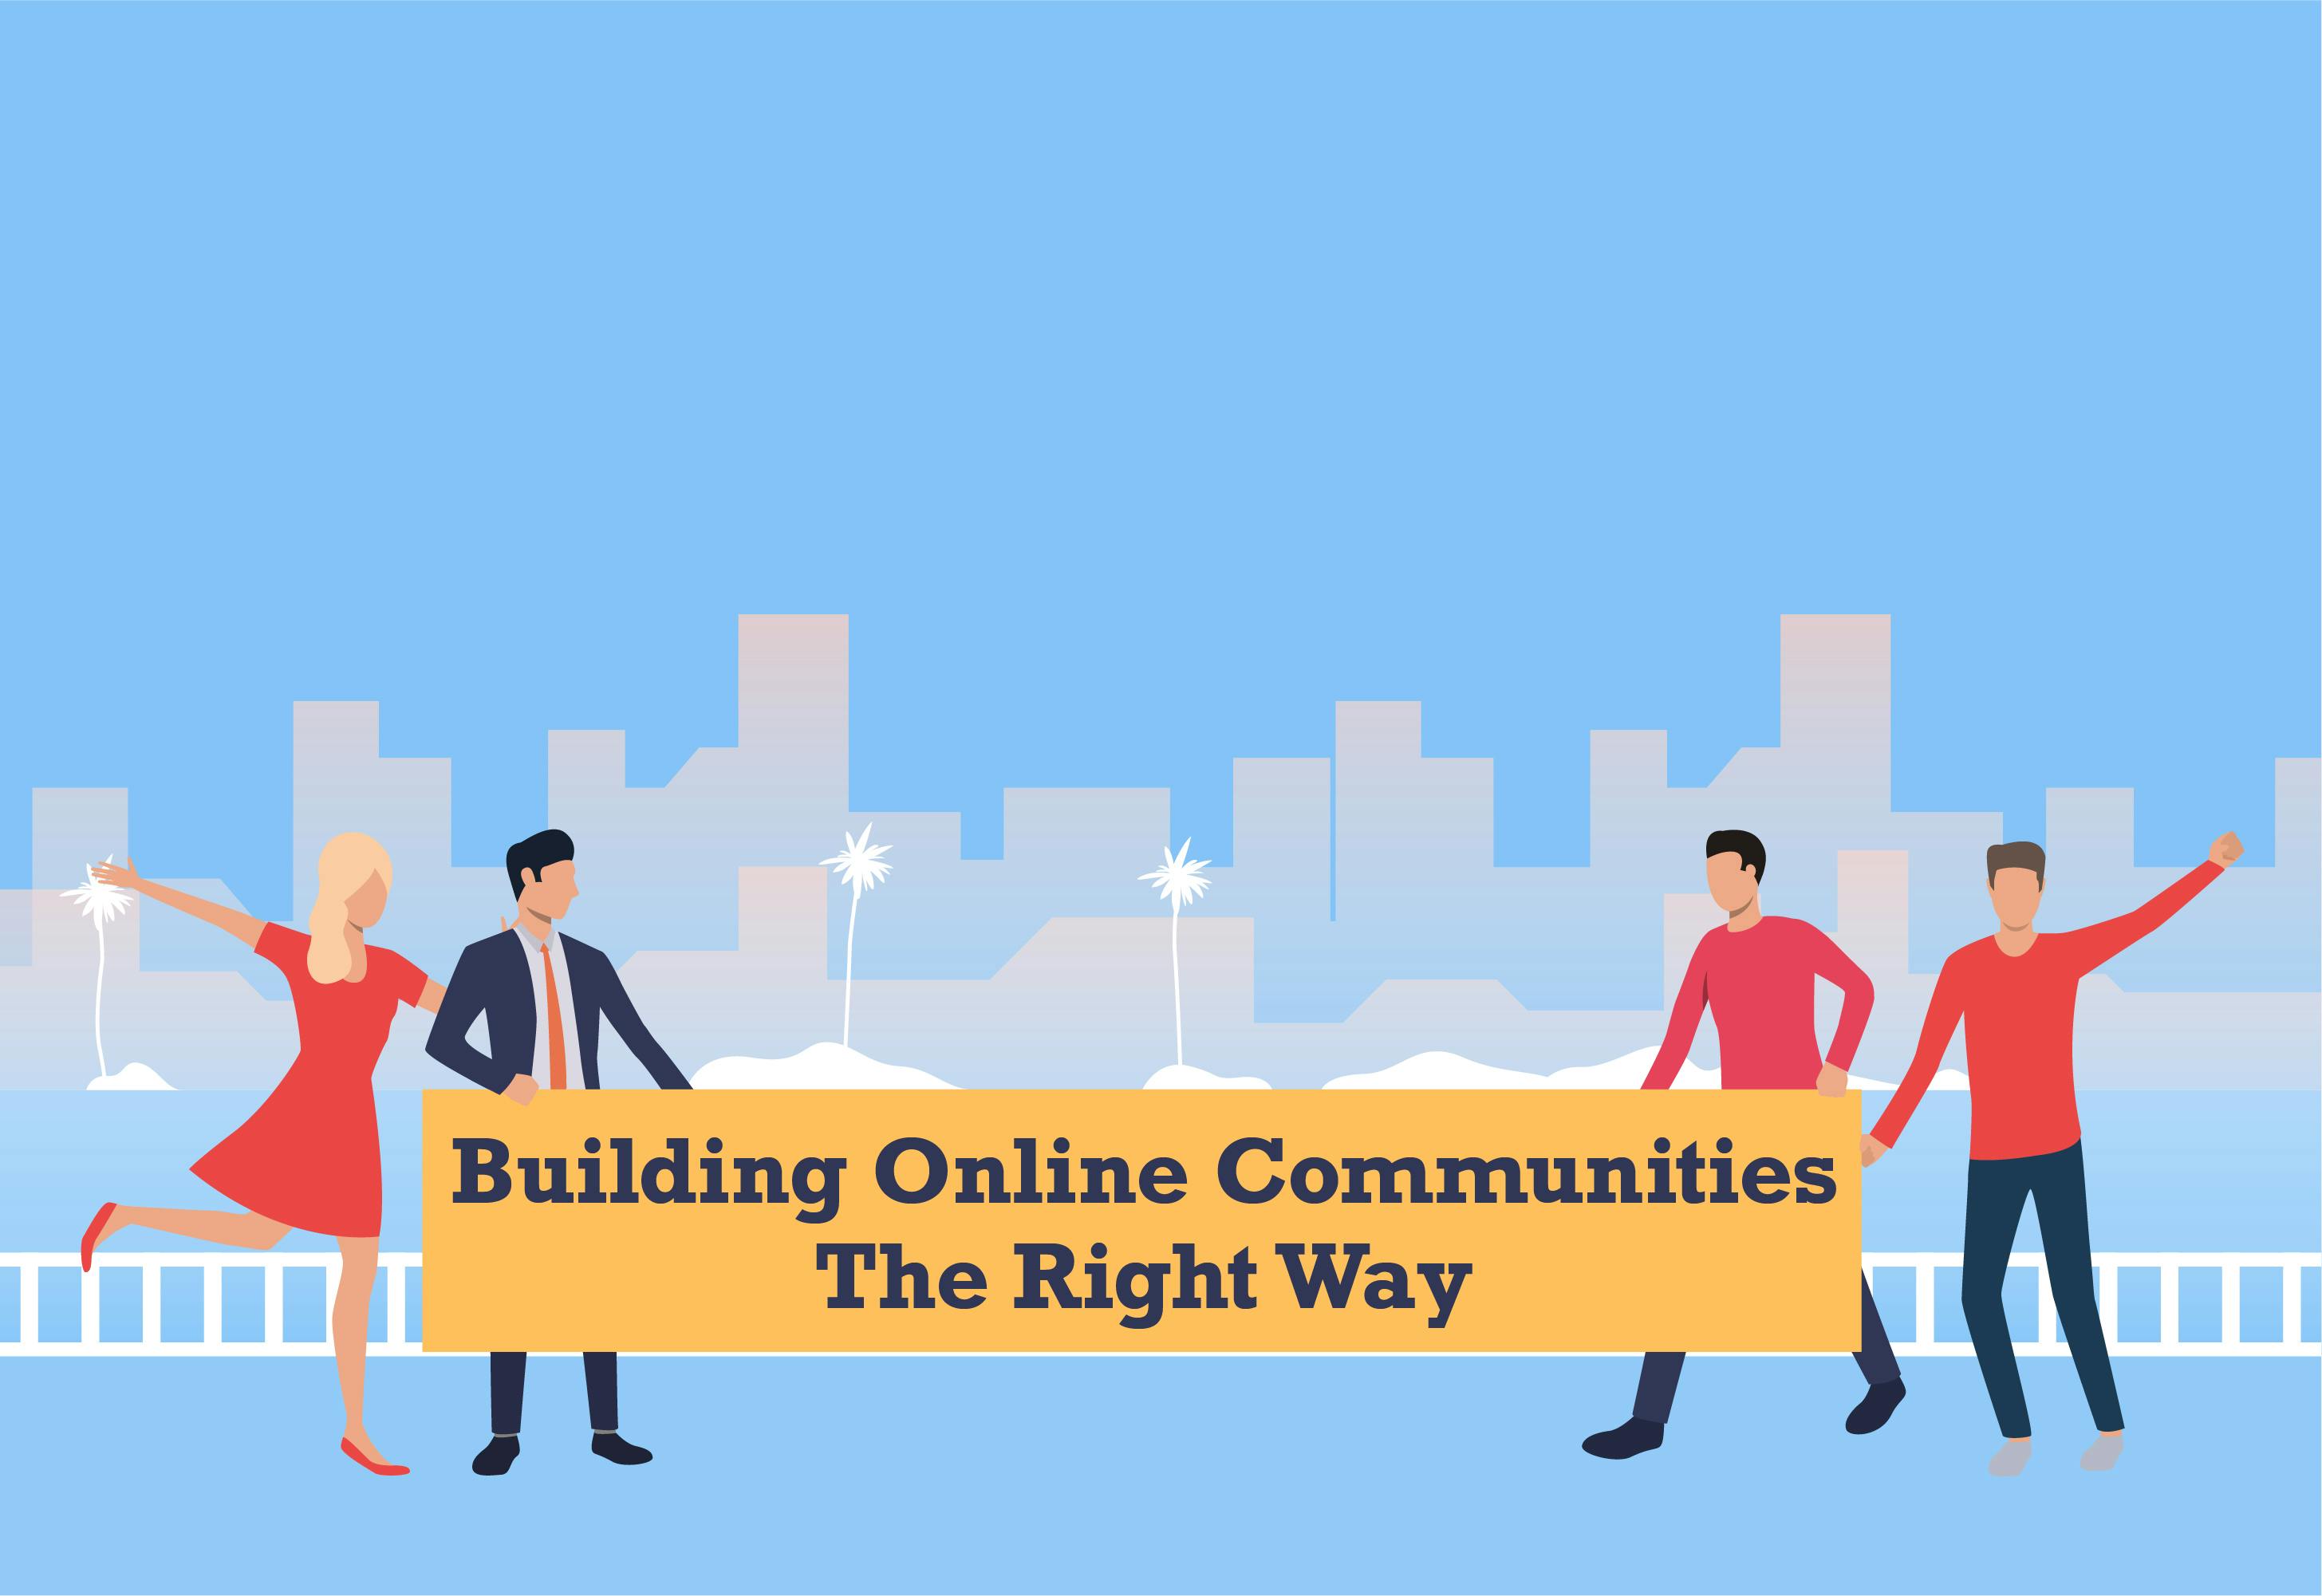 Building Online Communities - The Right Way